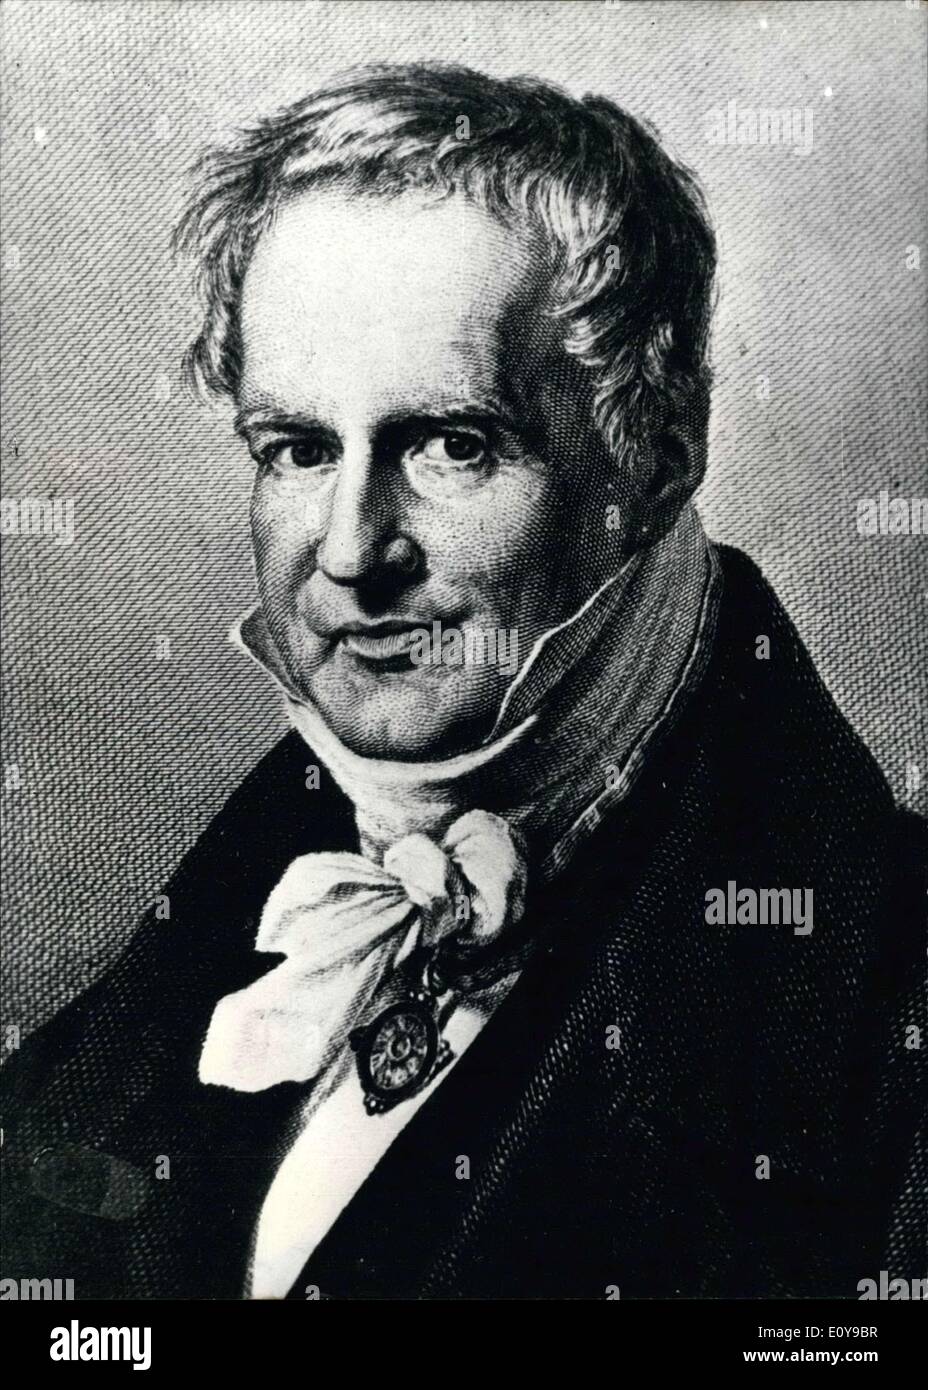 Sep. 04, 1969 - 200th Birthday of Alexander von Humboldt. On September 14, 1769 Alexander Freiherr von Humboldt was born in Berlin. He was one of the greatest nature researchers and founders of physical geography. In 1797 he met the botanist Bonpland in Paris. Between 1799 and 1804, he traveled with Bonpland past the Canary Islands to America and made countless observations on natural science in Venezuela, the Orinoco region, Colombia, Ekuador(ascending the Chimborazo), Mexico, and Cuba and brought those observations back to Europe. In 1829 he undertook an expedition to Central Asia Stock Photo